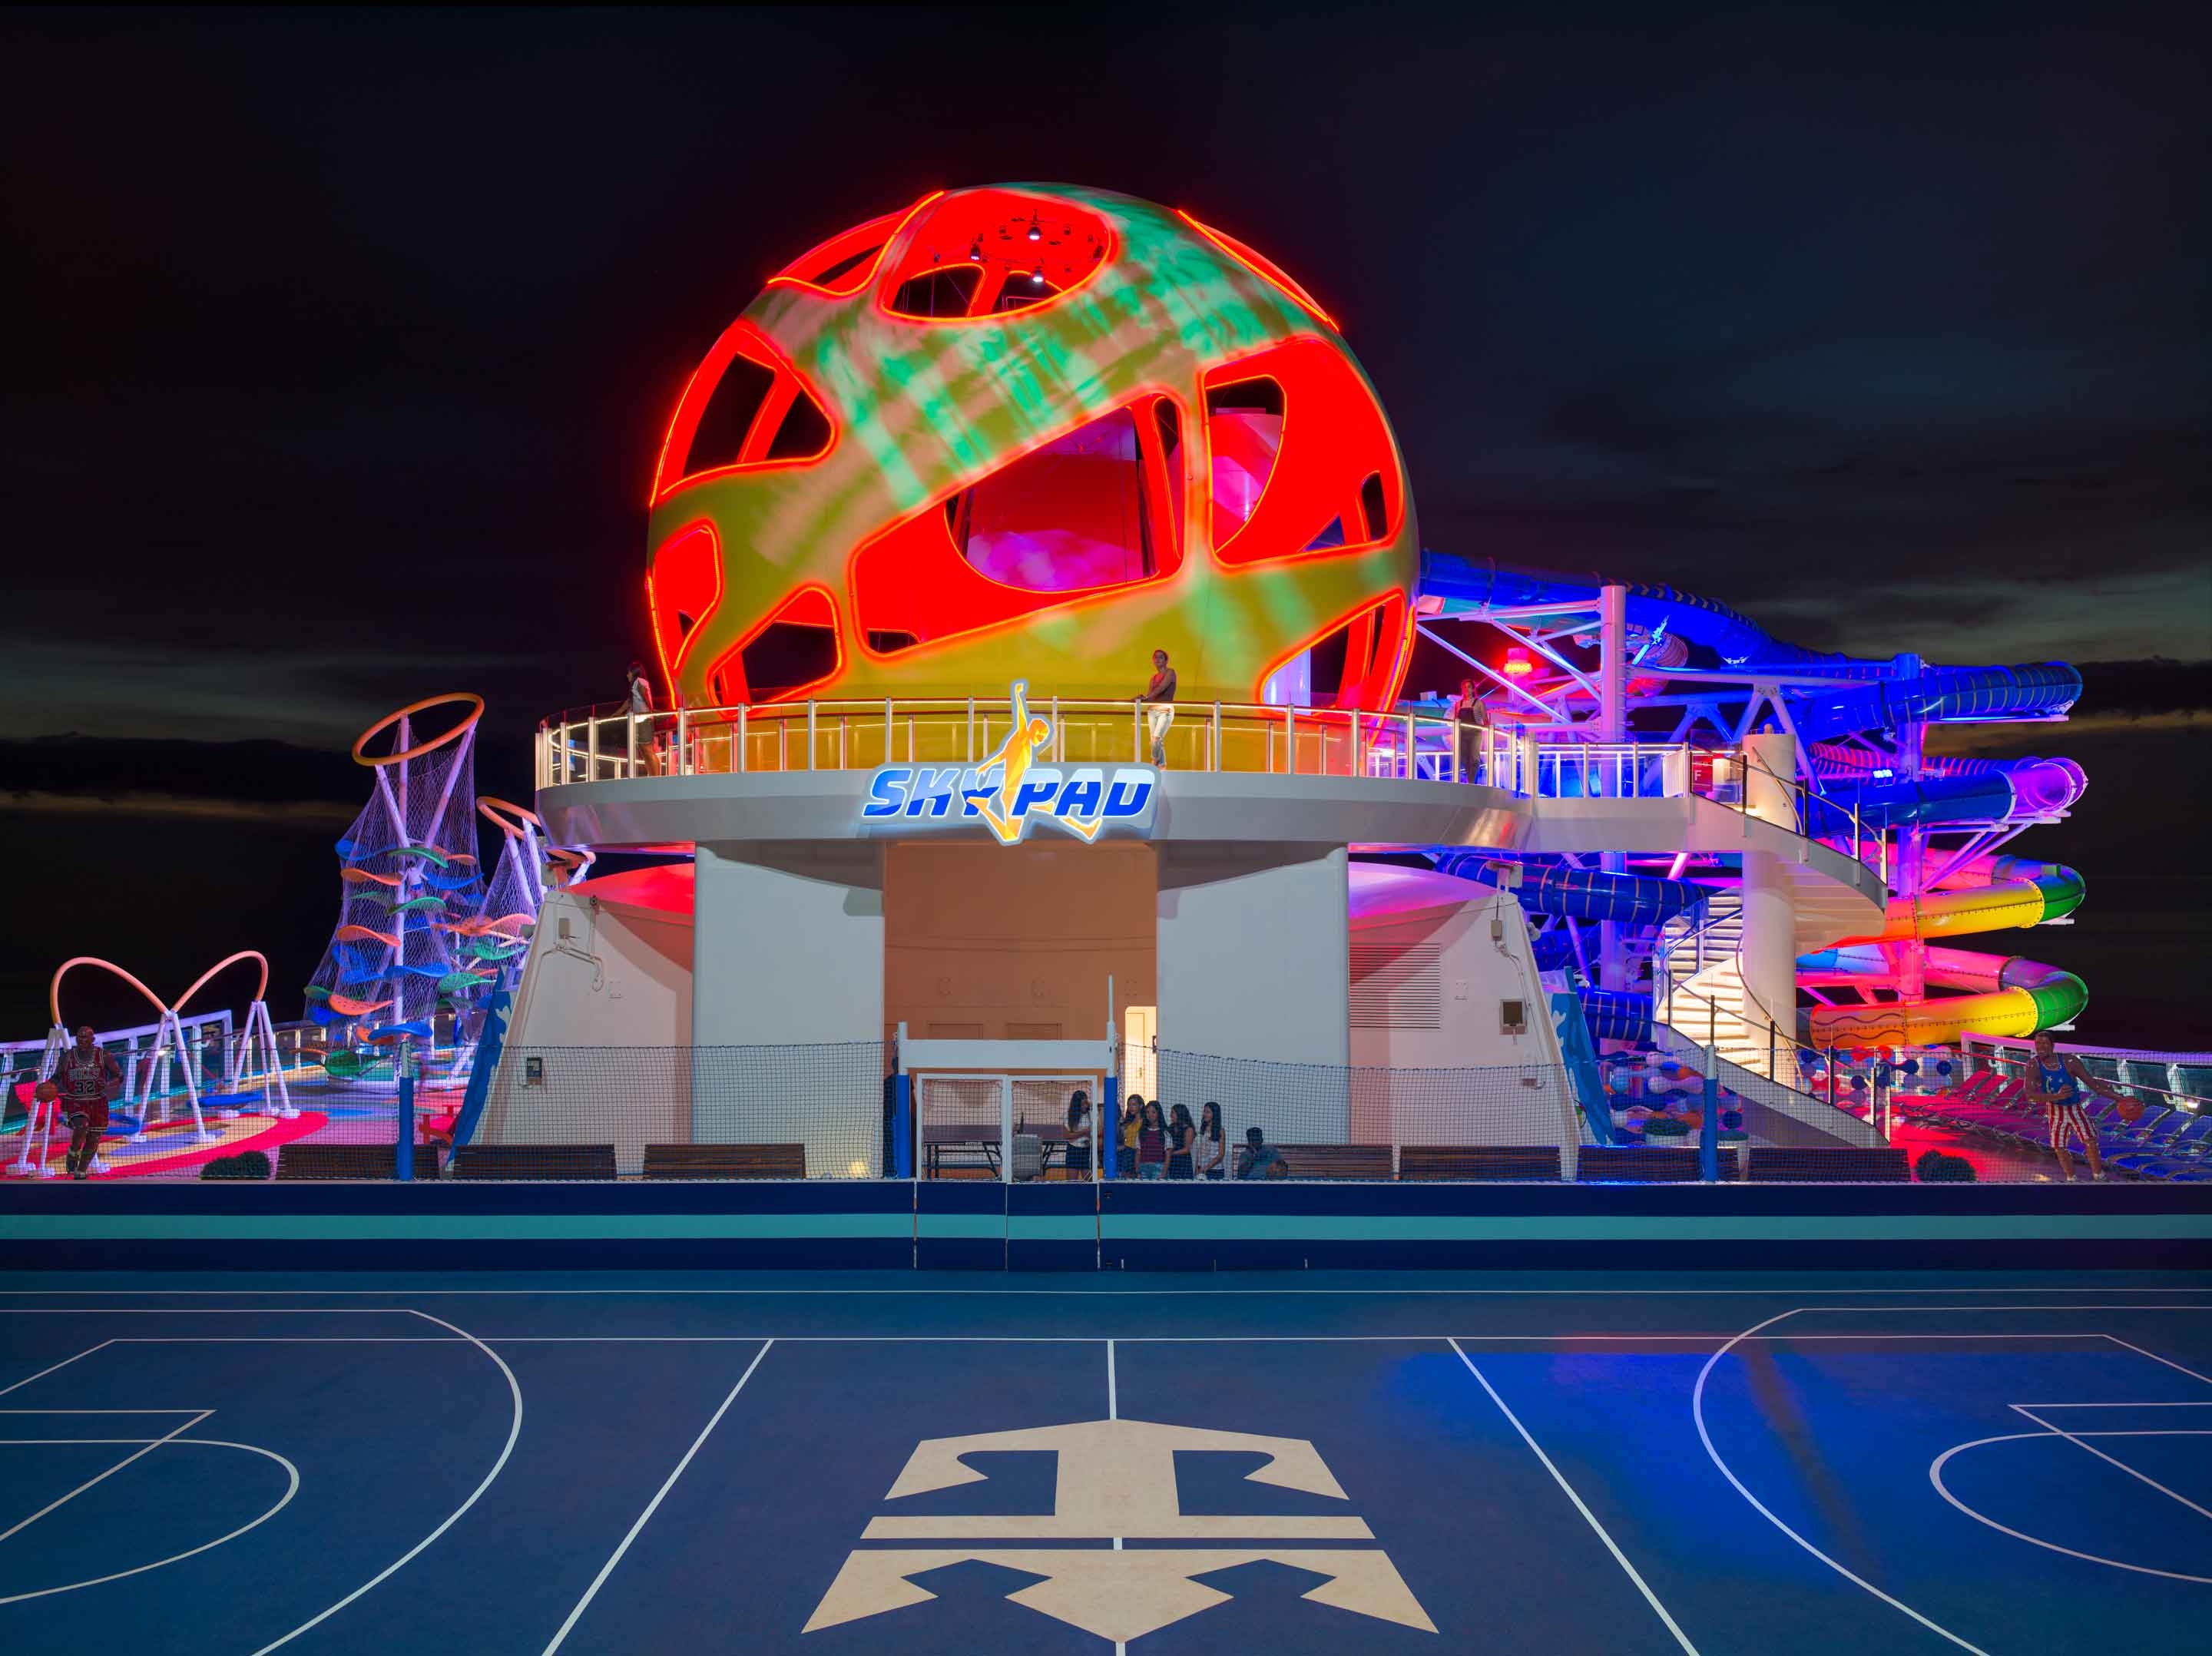 View of Skypad, Court, and Slides at night